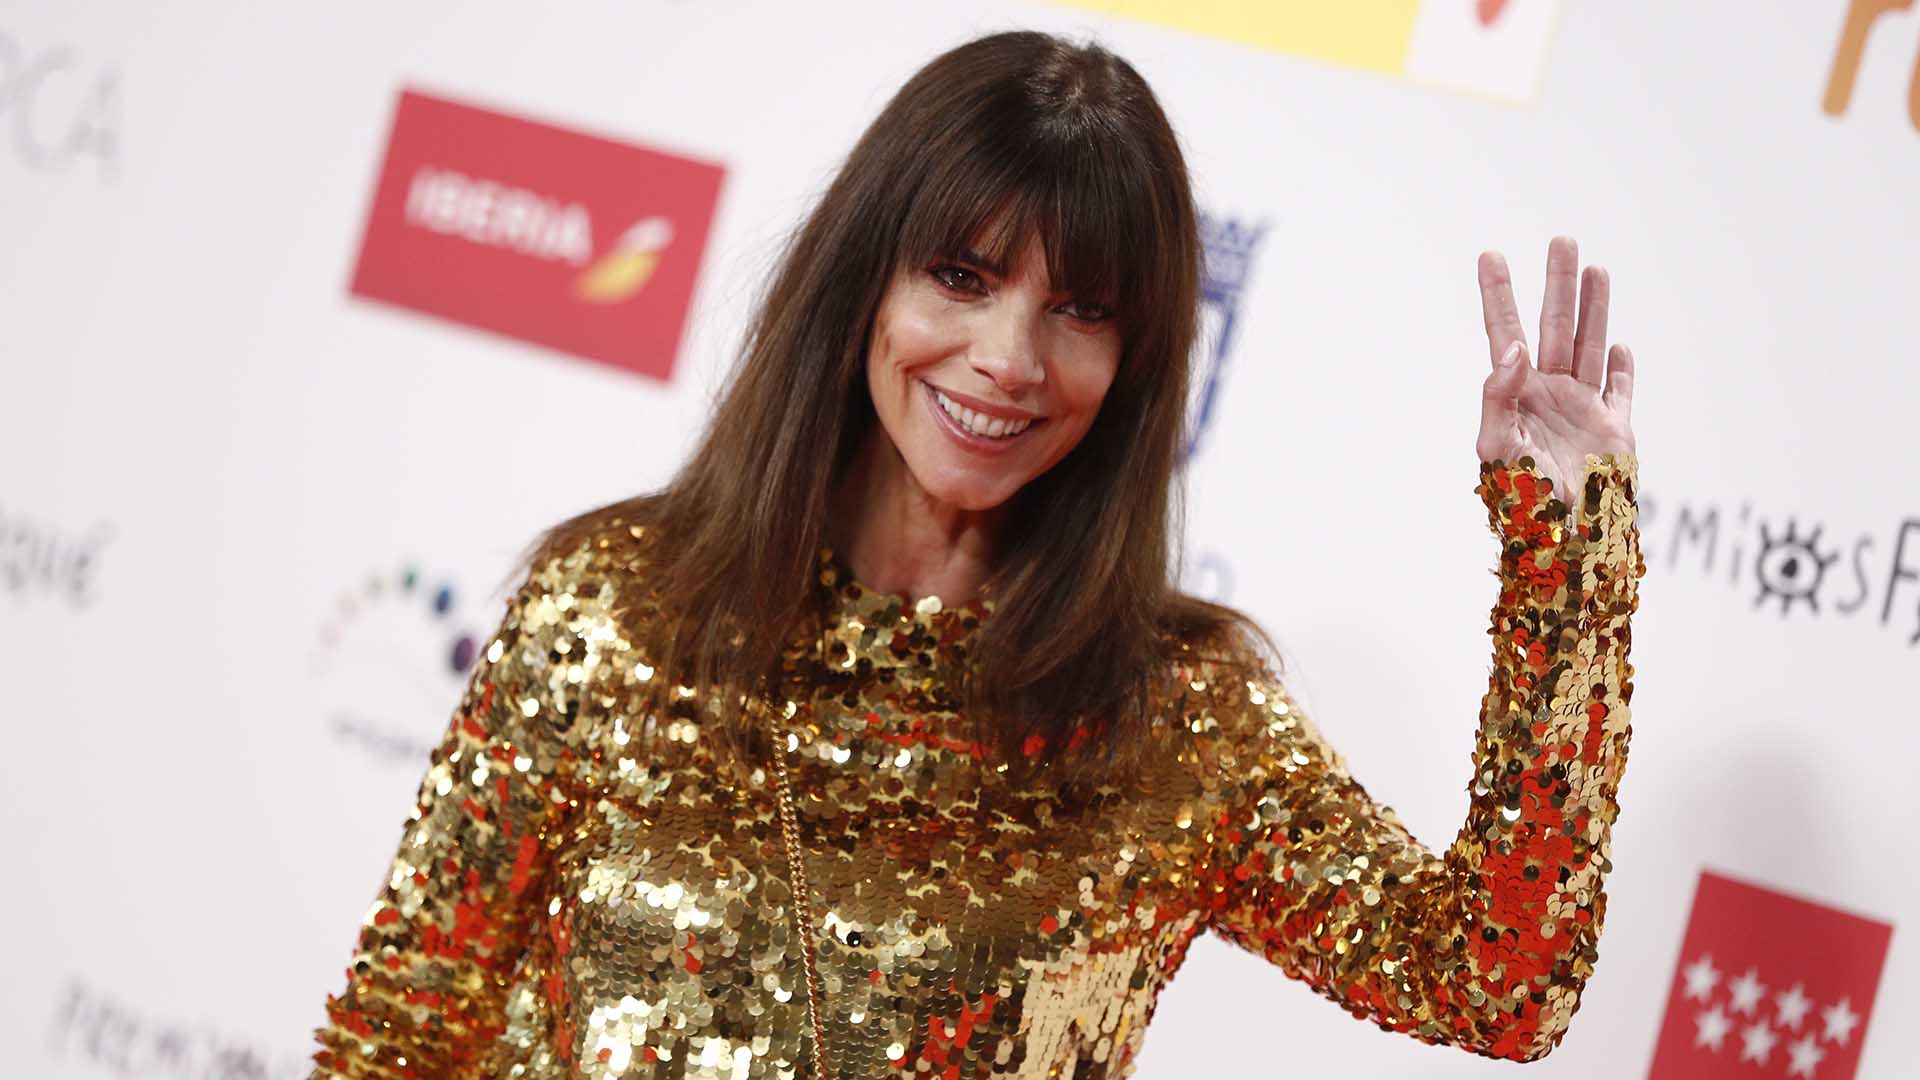 Actress Maribel Verdu at photocall for the 27th annual Jose Maria Forque Awards in Madrid on Saturday, 11 December 2021.